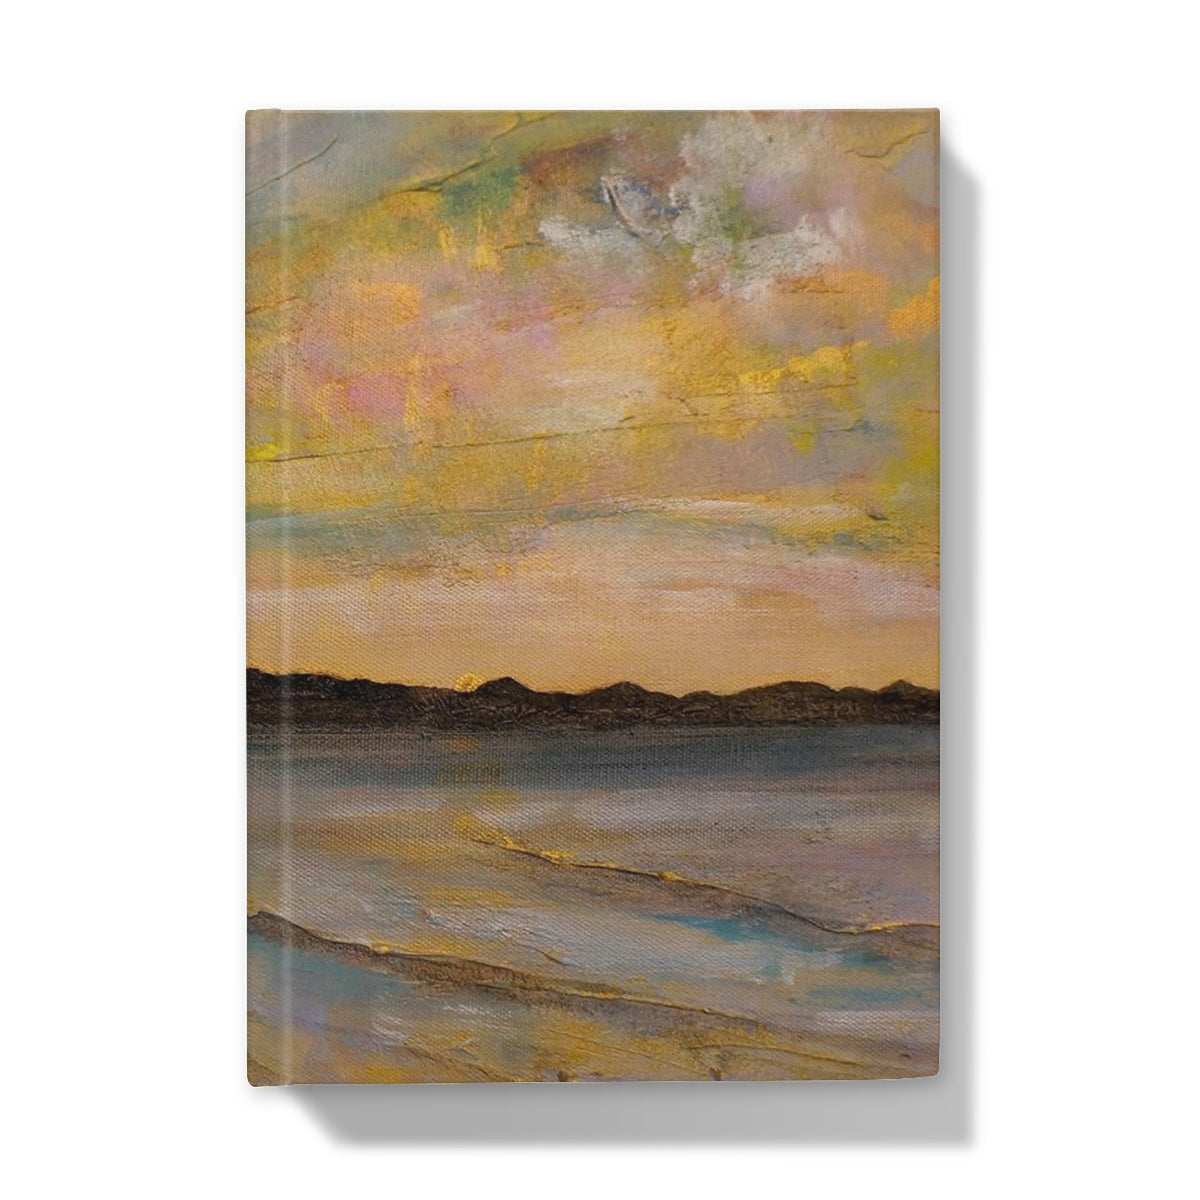 Vallay Island North Uist Art Gifts Hardback Journal-Journals & Notebooks-Hebridean Islands Art Gallery-5"x7"-Lined-Paintings, Prints, Homeware, Art Gifts From Scotland By Scottish Artist Kevin Hunter